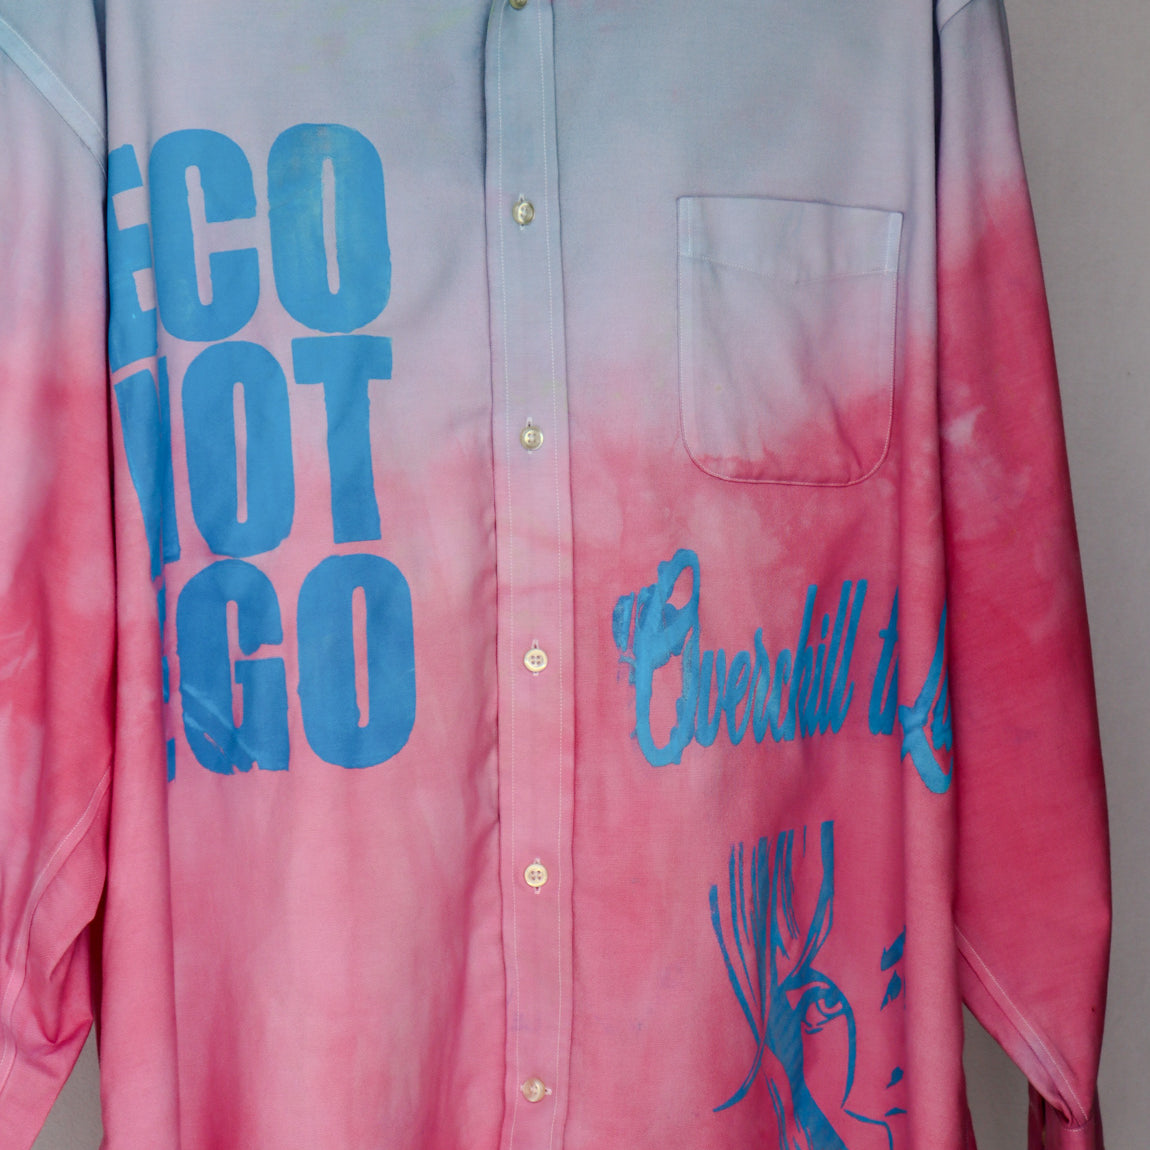 1 OF 1 CUSTOM DYED ECO NOT EGO BUTTON DOWN